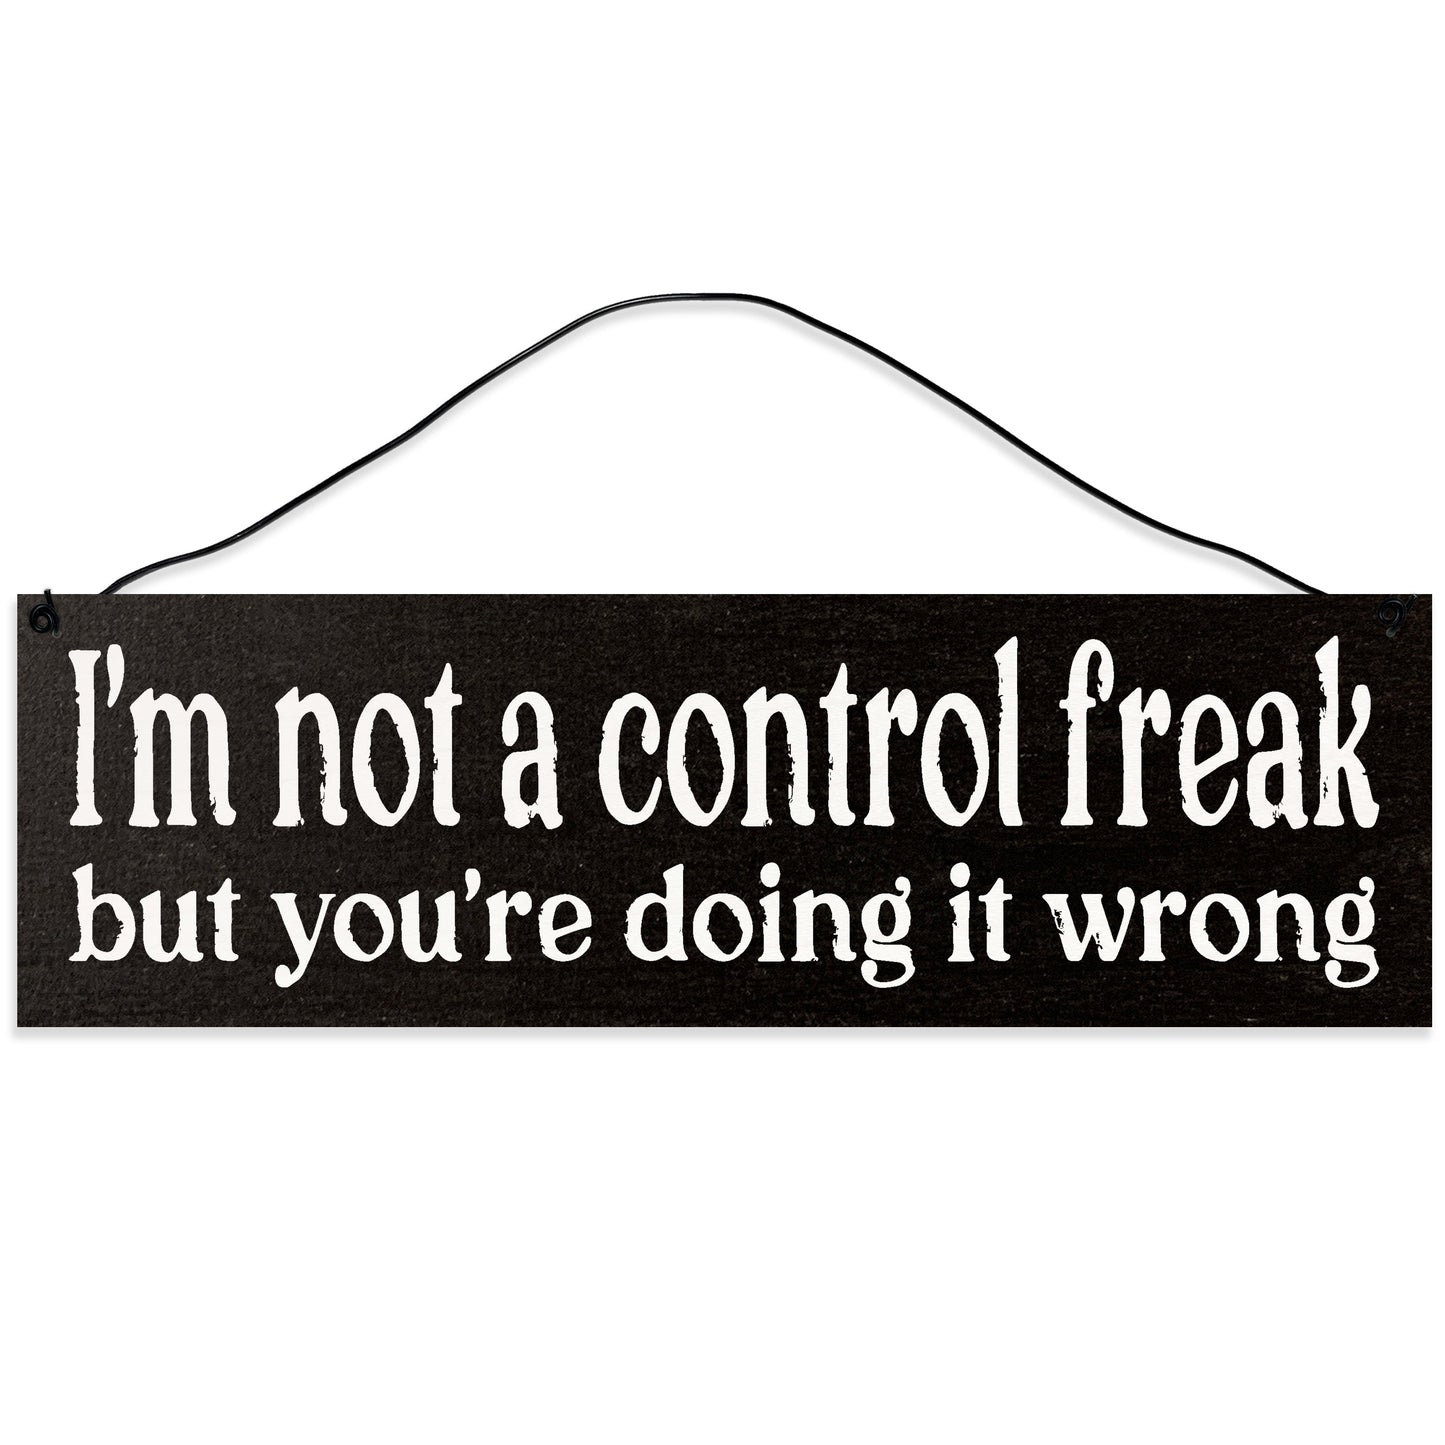 Sawyer's Mill - I'm Not a Control Freak, but You're Doing it Wrong. Wood Sign for Home or Office. Measures 3x10 inches.